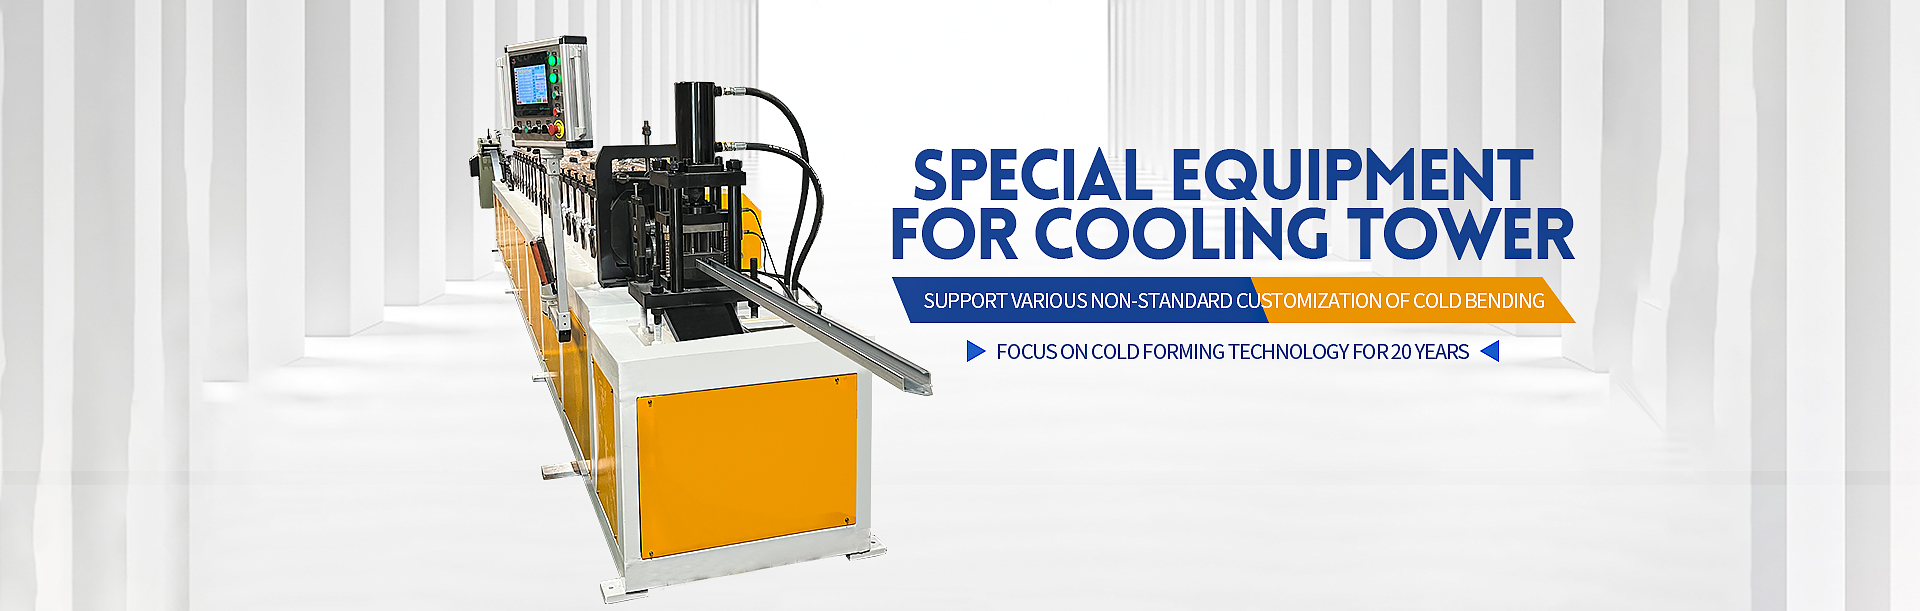 Special Equipment for Cooling Tower